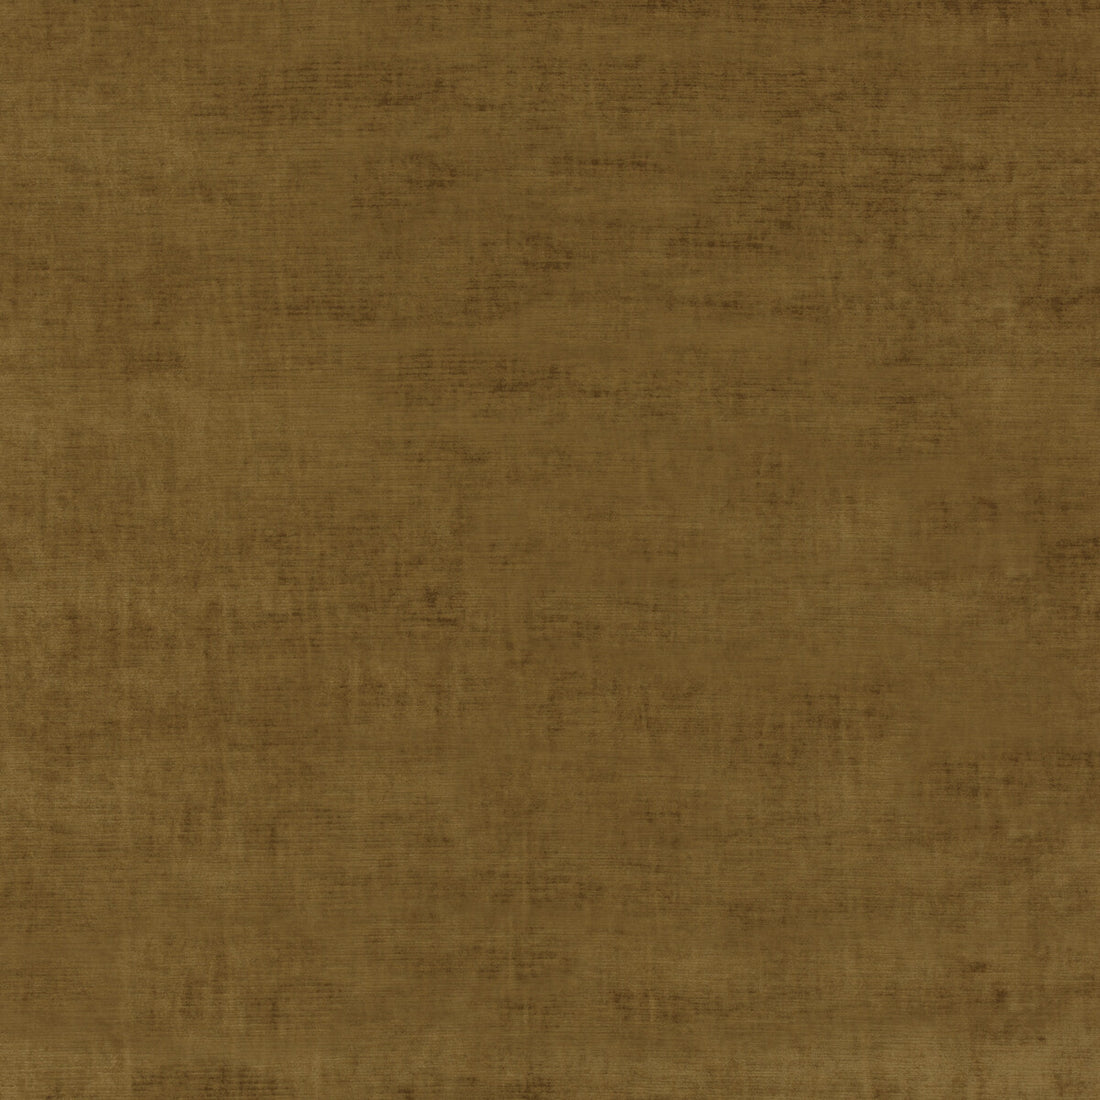 Meridian Velvet fabric in bronze color - pattern ED85292.850.0 - by Threads in the Meridian collection